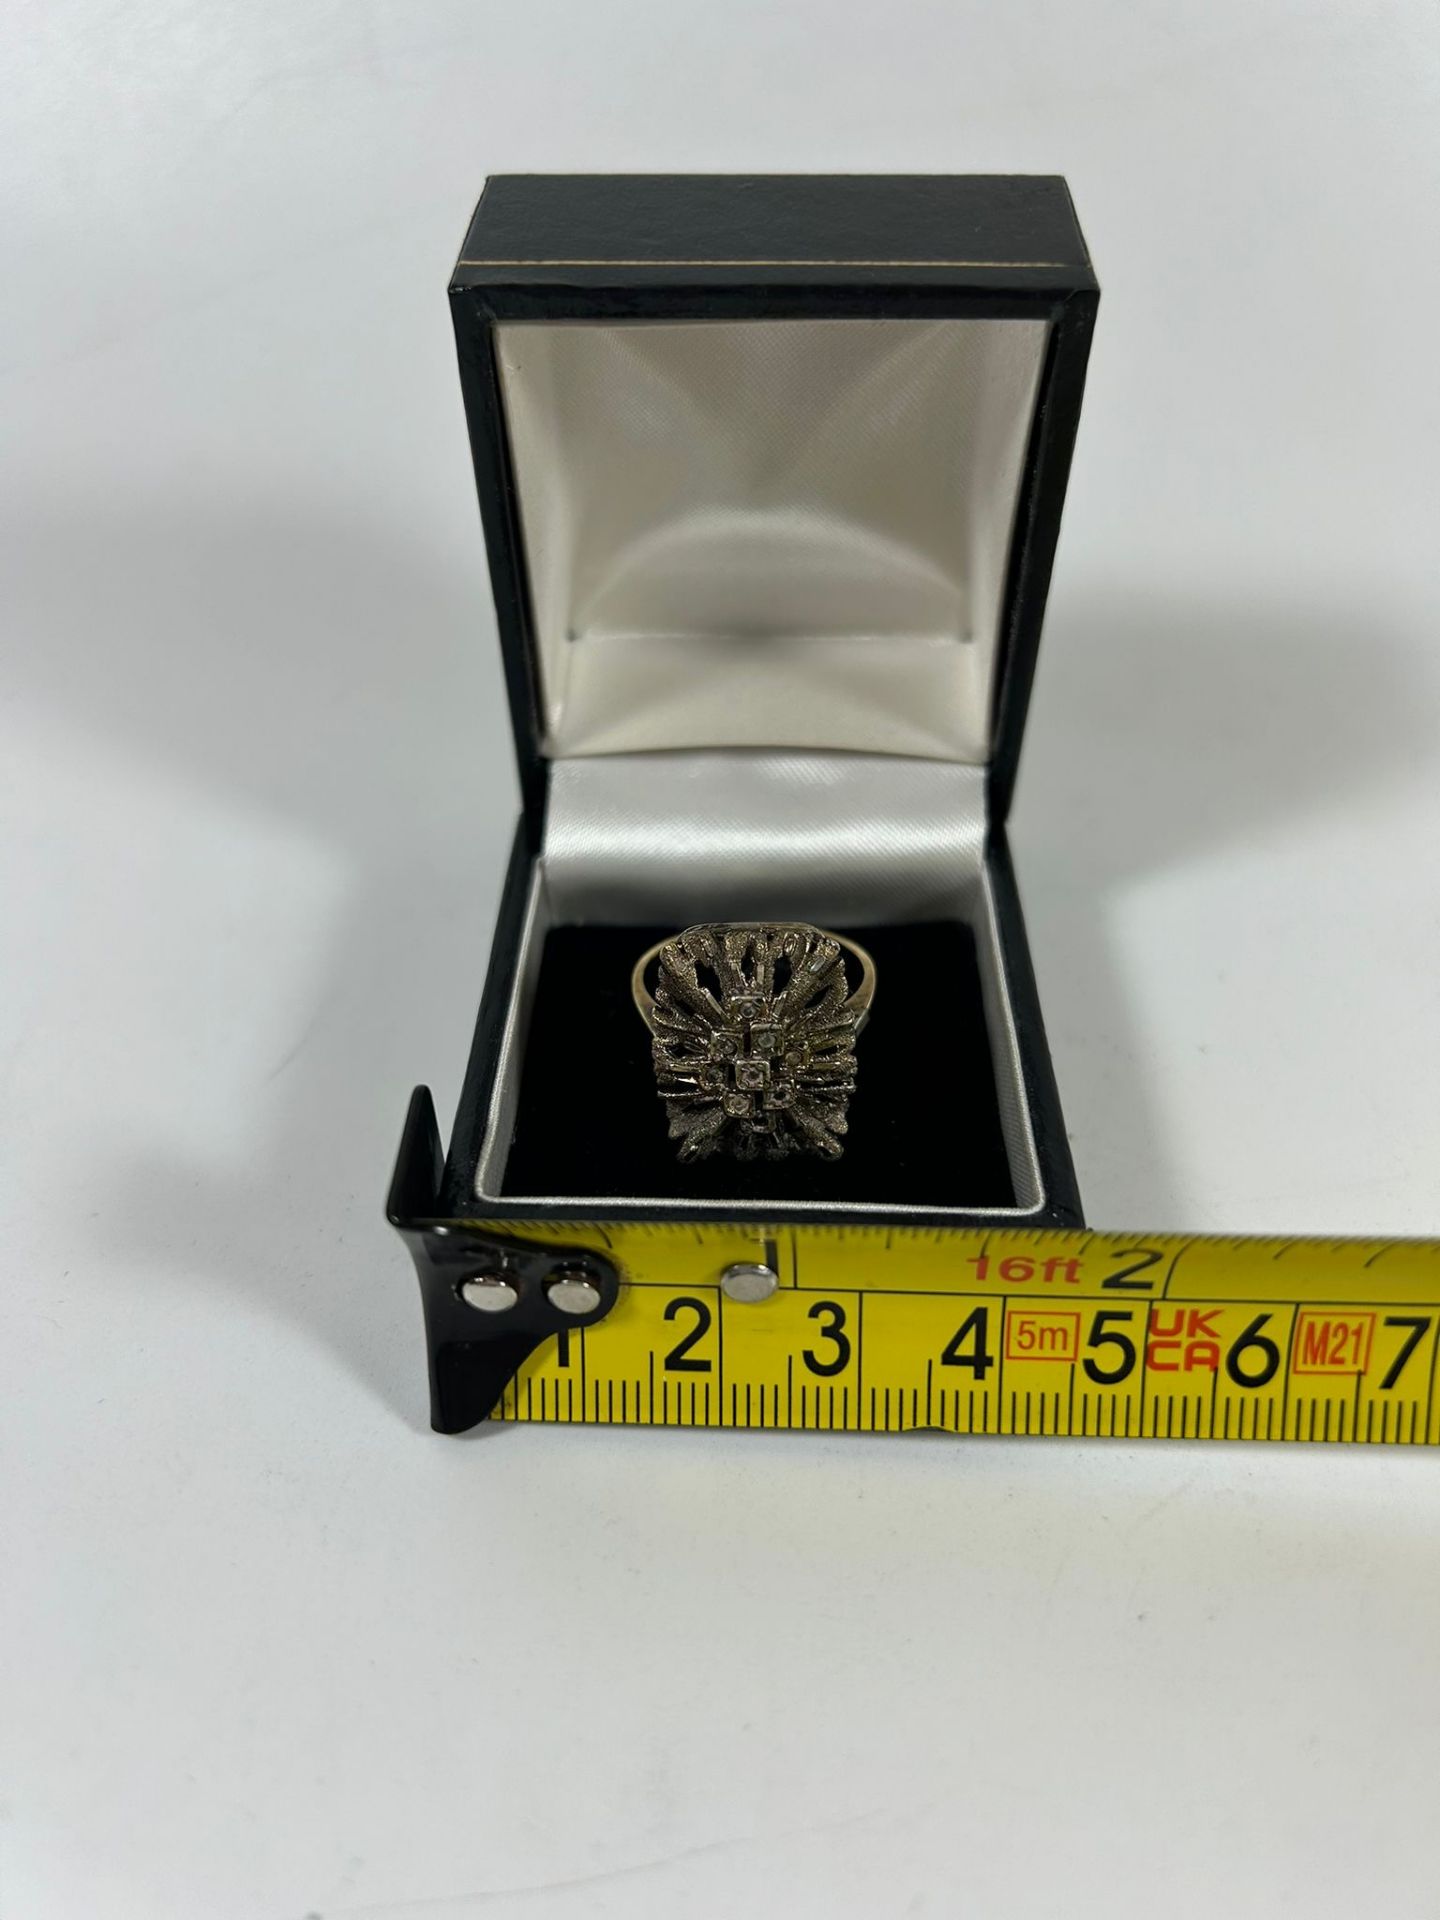 A BOXED ART DECO STYLE SILVER GILT MARCASITE RING - Image 4 of 4